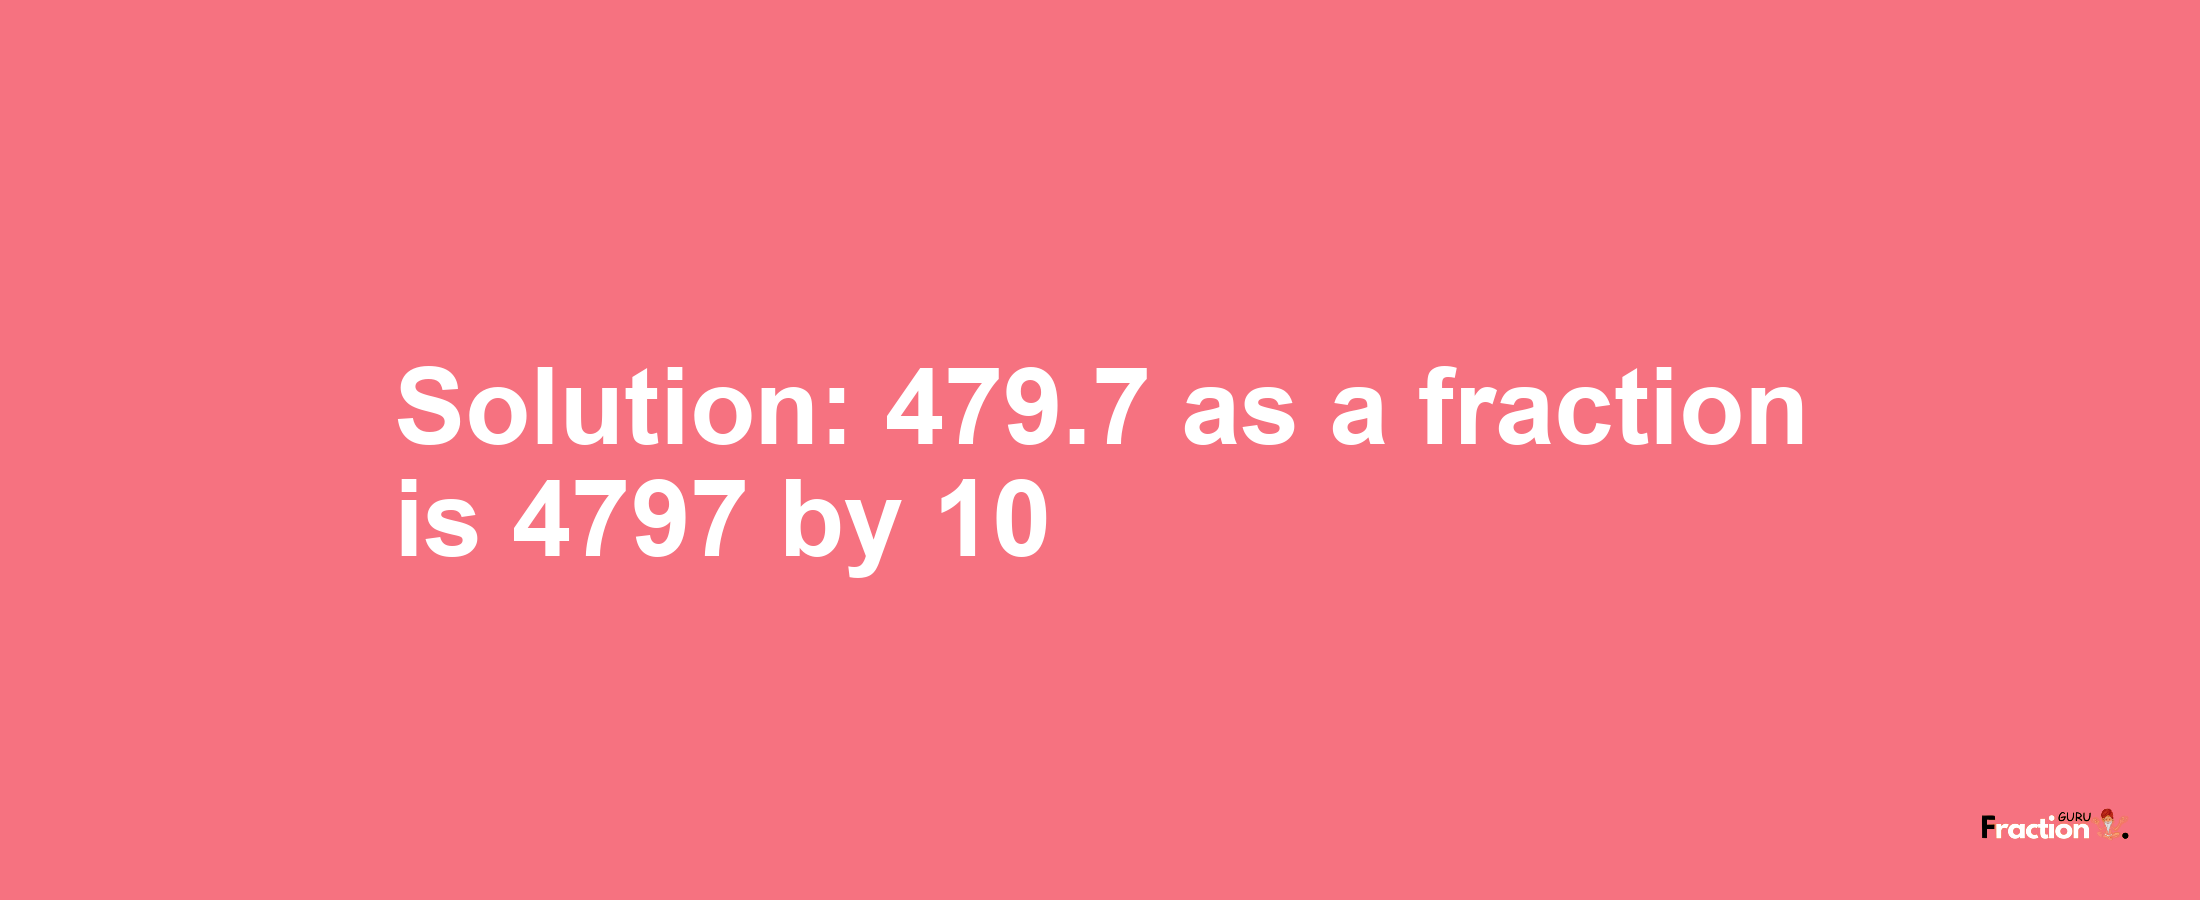 Solution:479.7 as a fraction is 4797/10